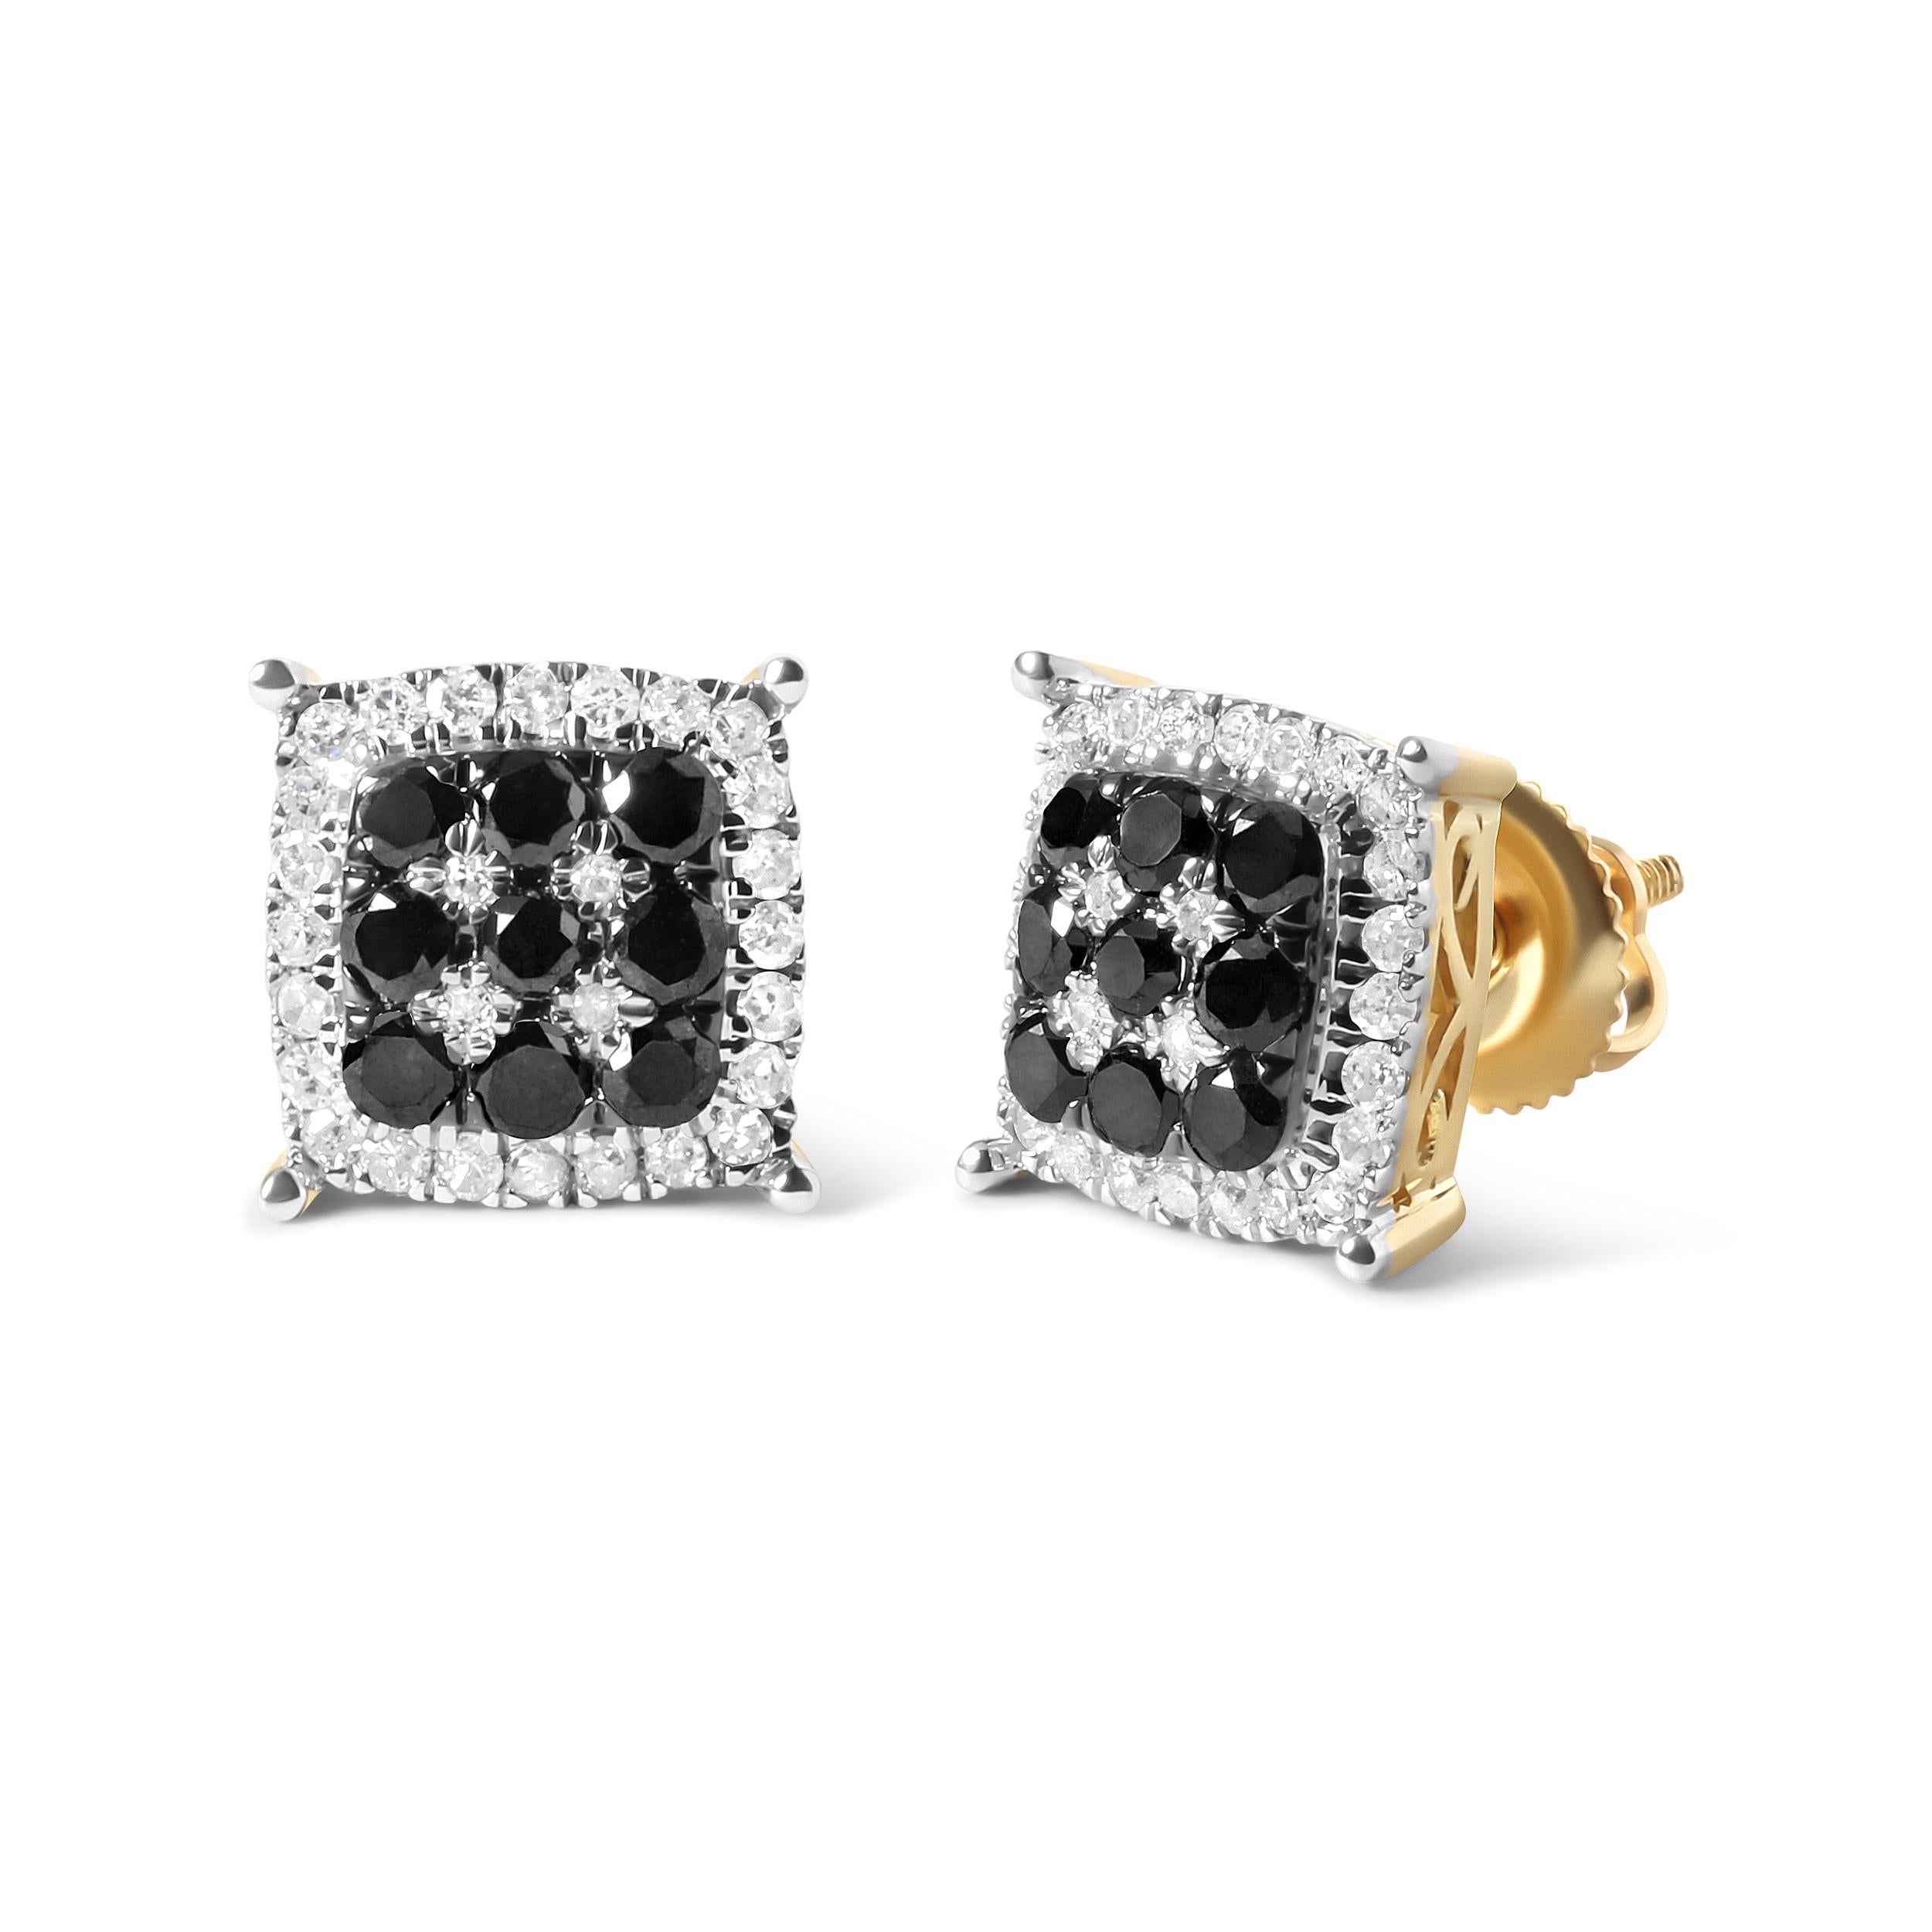 Indulge in the luxury of these stunning diamond stud earrings. Crafted from gleaming 10K yellow gold, these earrings boast a mesmerizing combination of black and white diamonds. With a total of 74 natural diamonds, including 18 black color treated